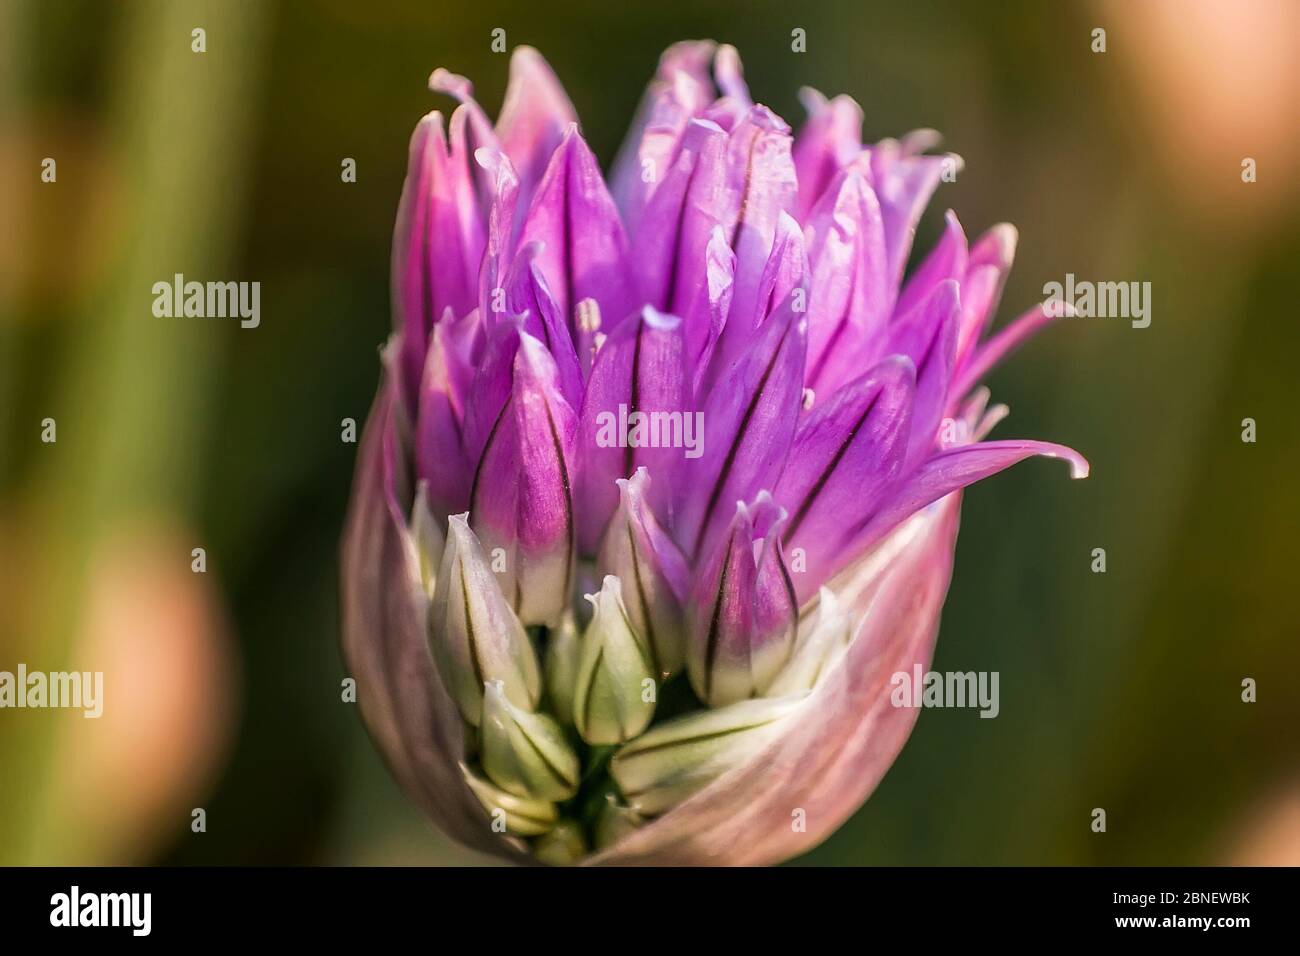 Flower in full bloom phase Grass Plant chives (Allium schoenoprasum). Detail of the petals of this flower with bright colors. Stock Photo